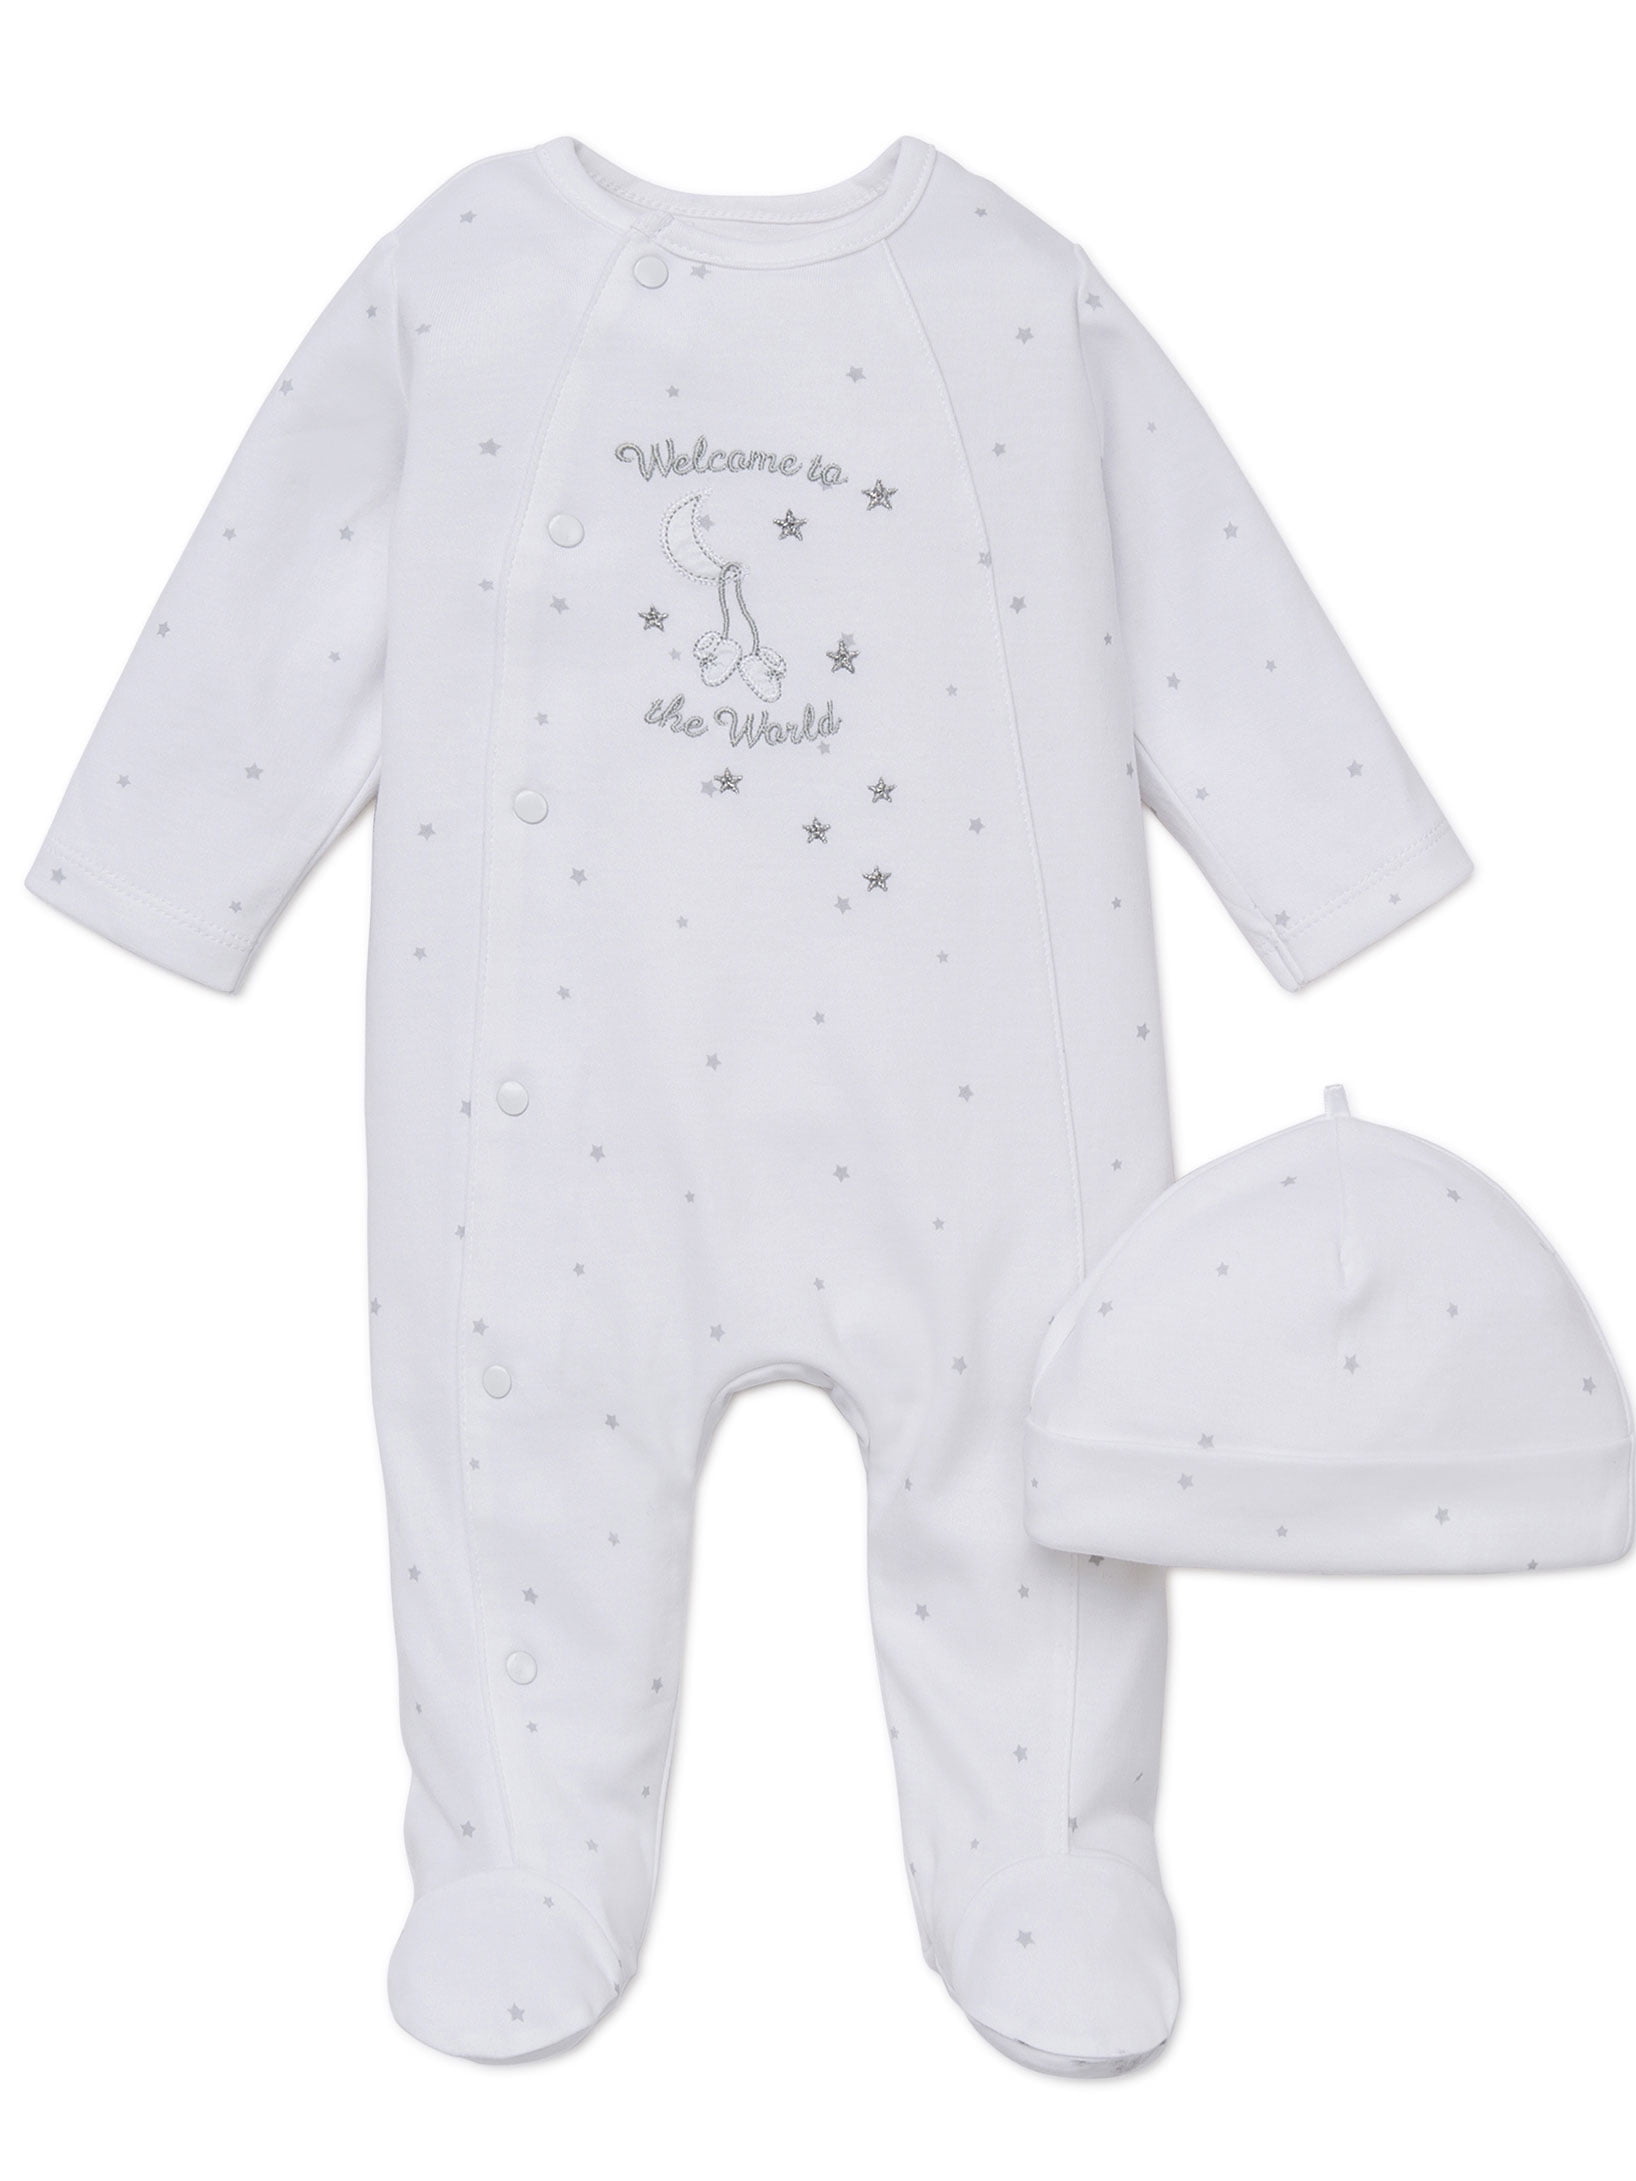 Valentines Sleep Play Cotton Snap Up Outfit Footie Sleeper Footed Boys Girls Day